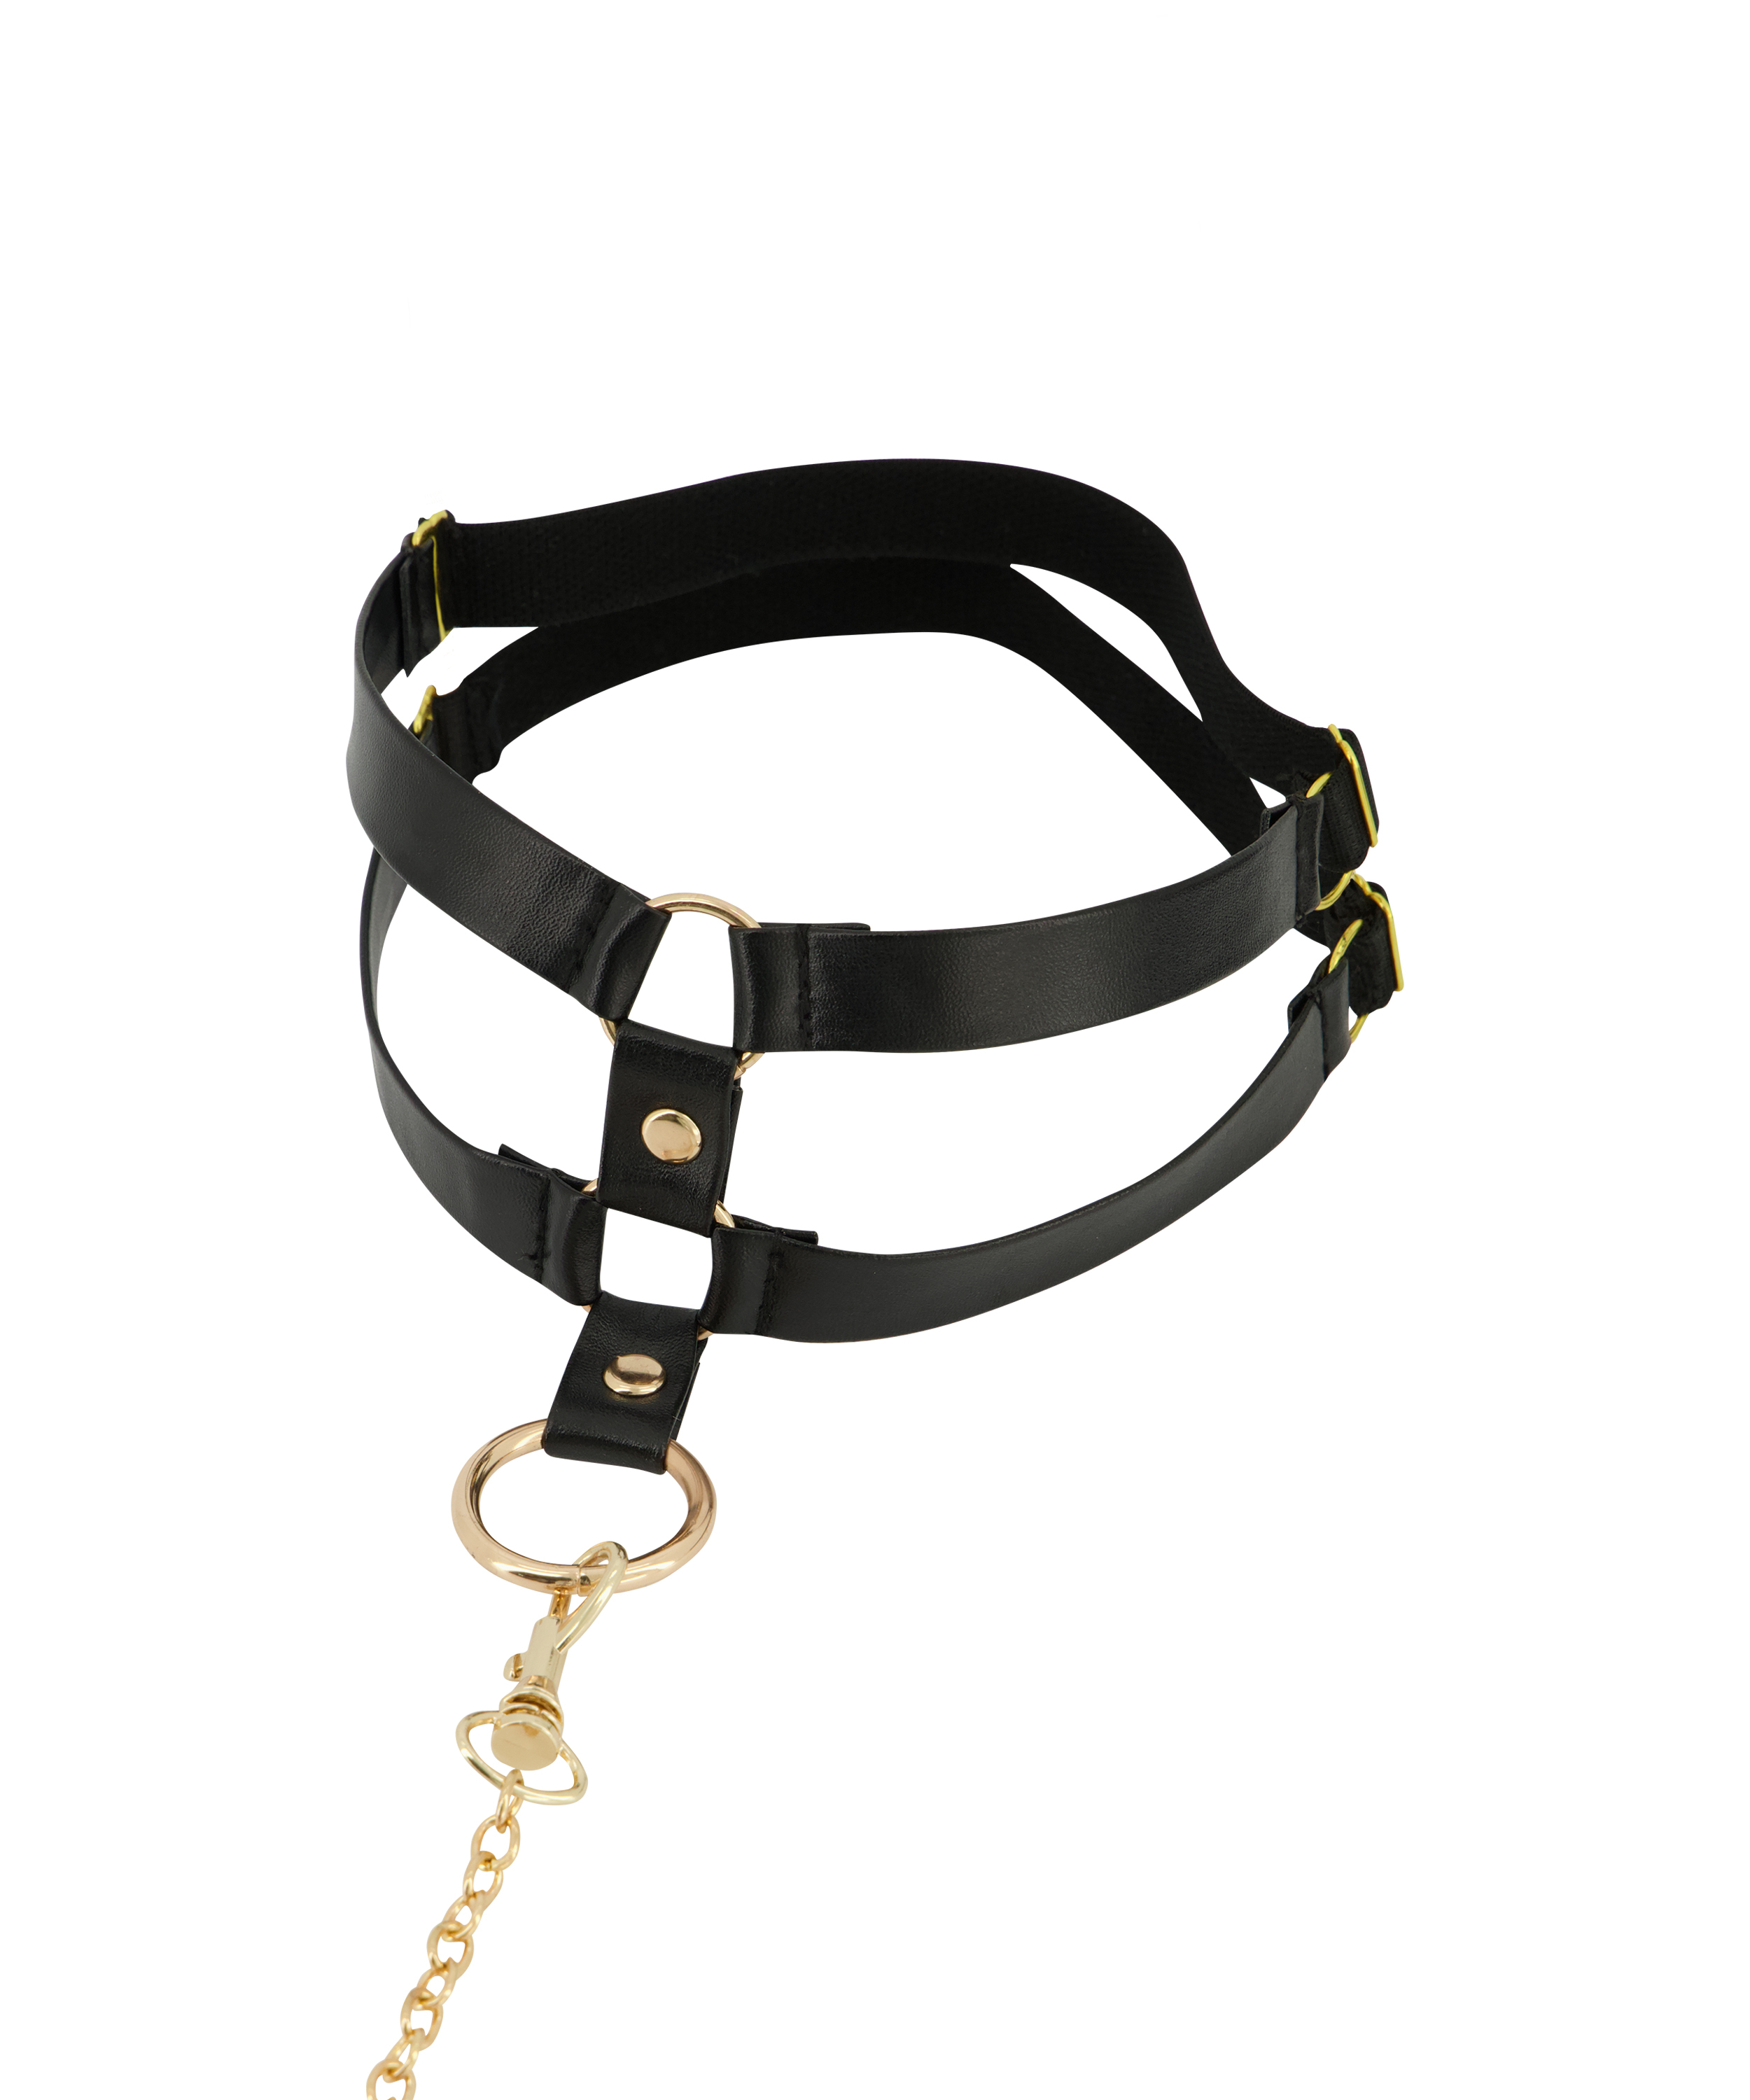 grond toetje Afstoting Private Choker Leash voor €5 - Private Collection - Hunkemöller